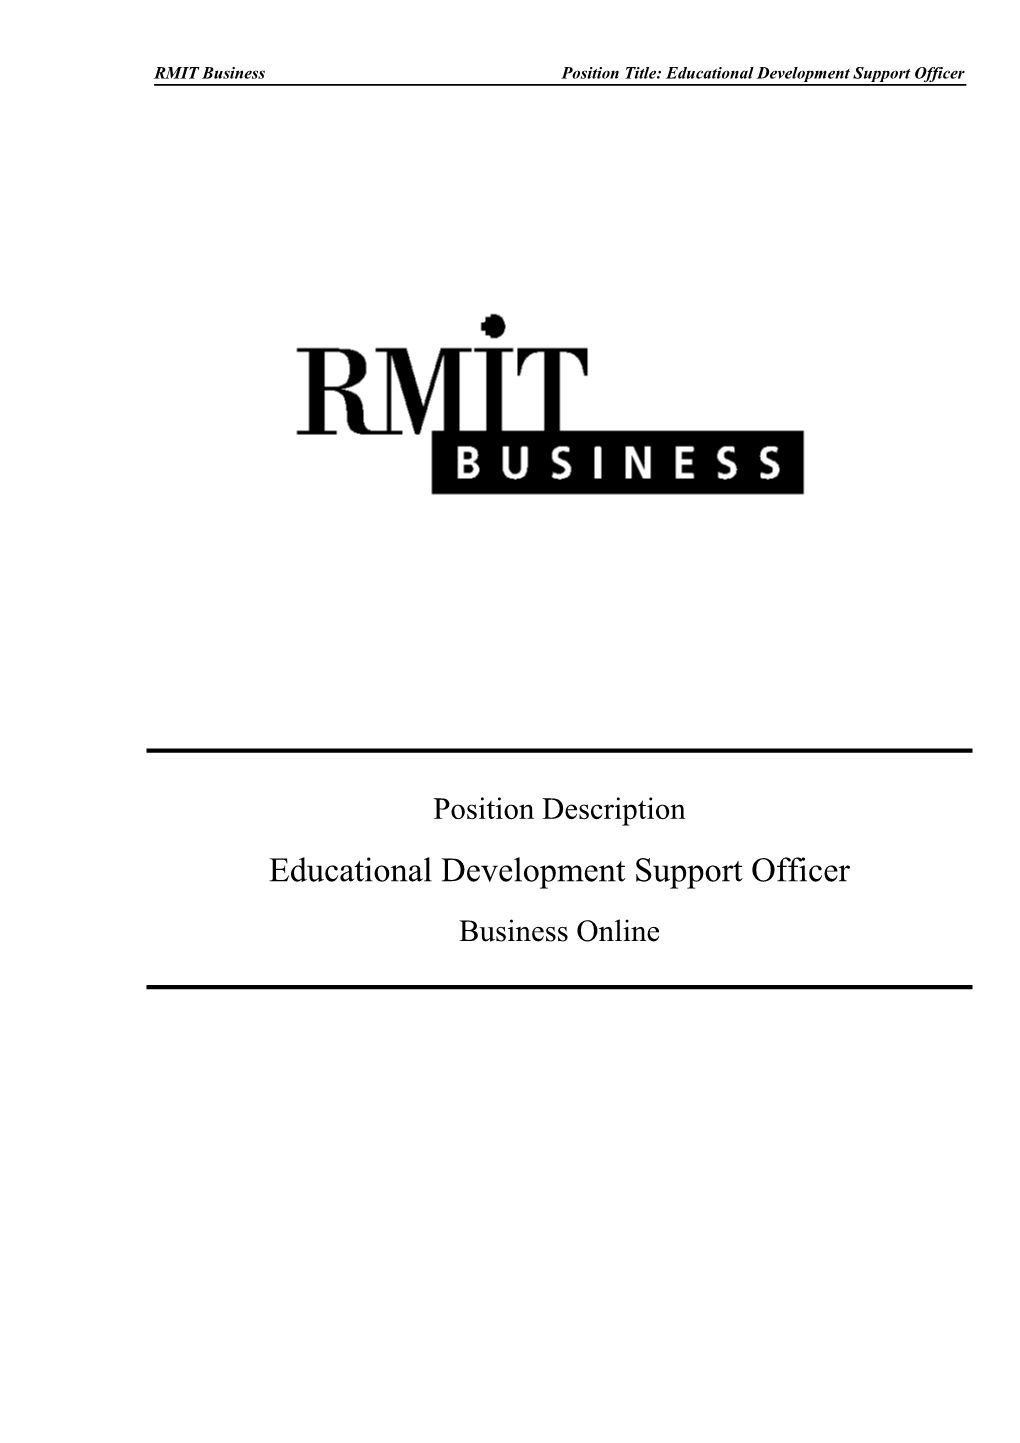 RMIT Businessposition Title: Educational Development Support Officer